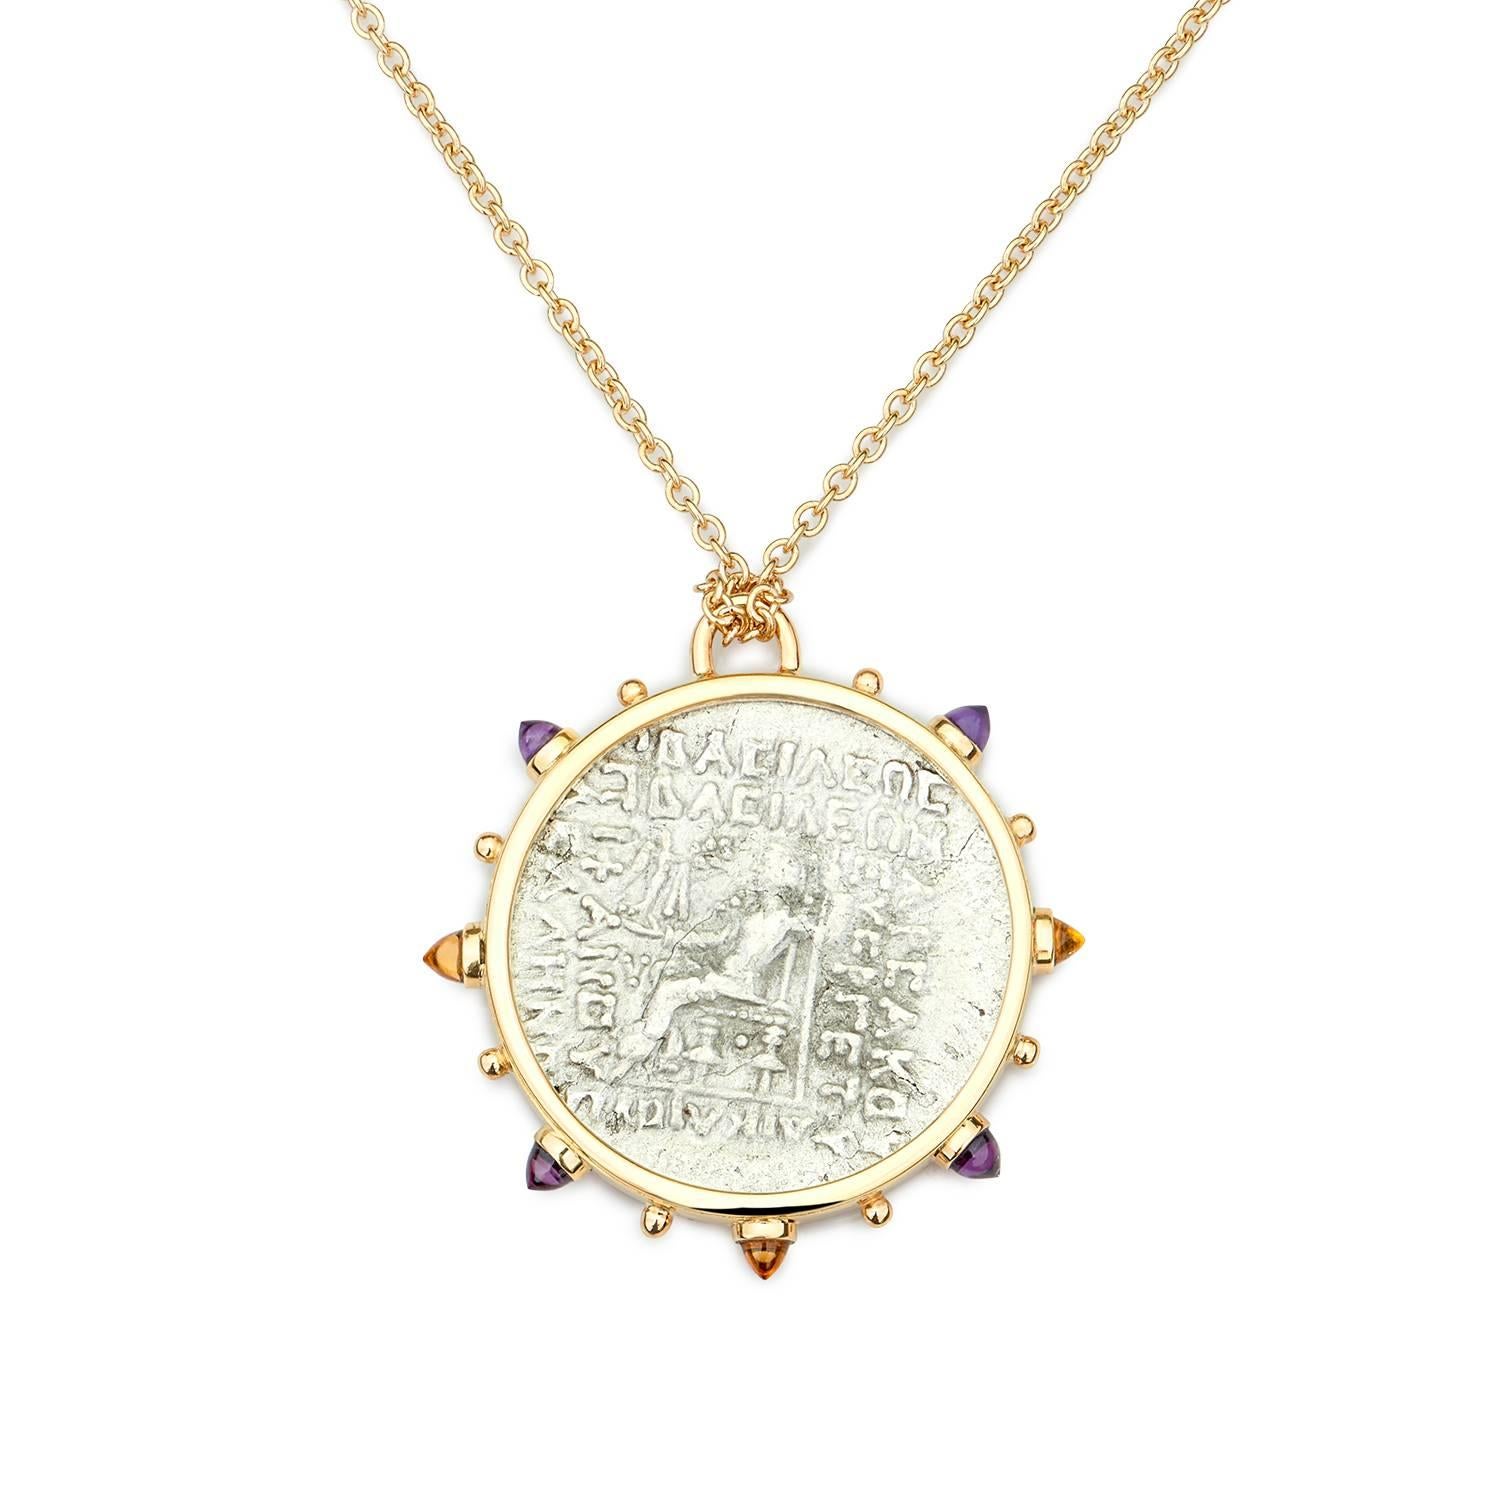 This DUBINI coin necklace from the 'Empires' collection features an authentic Parthian coin from 57-38 B.C. set in 18K yellow gold with bullet amethyst and citrine cabochons. 

Depicted on the coin: Oredes II, one of the kings of Parthia, on the